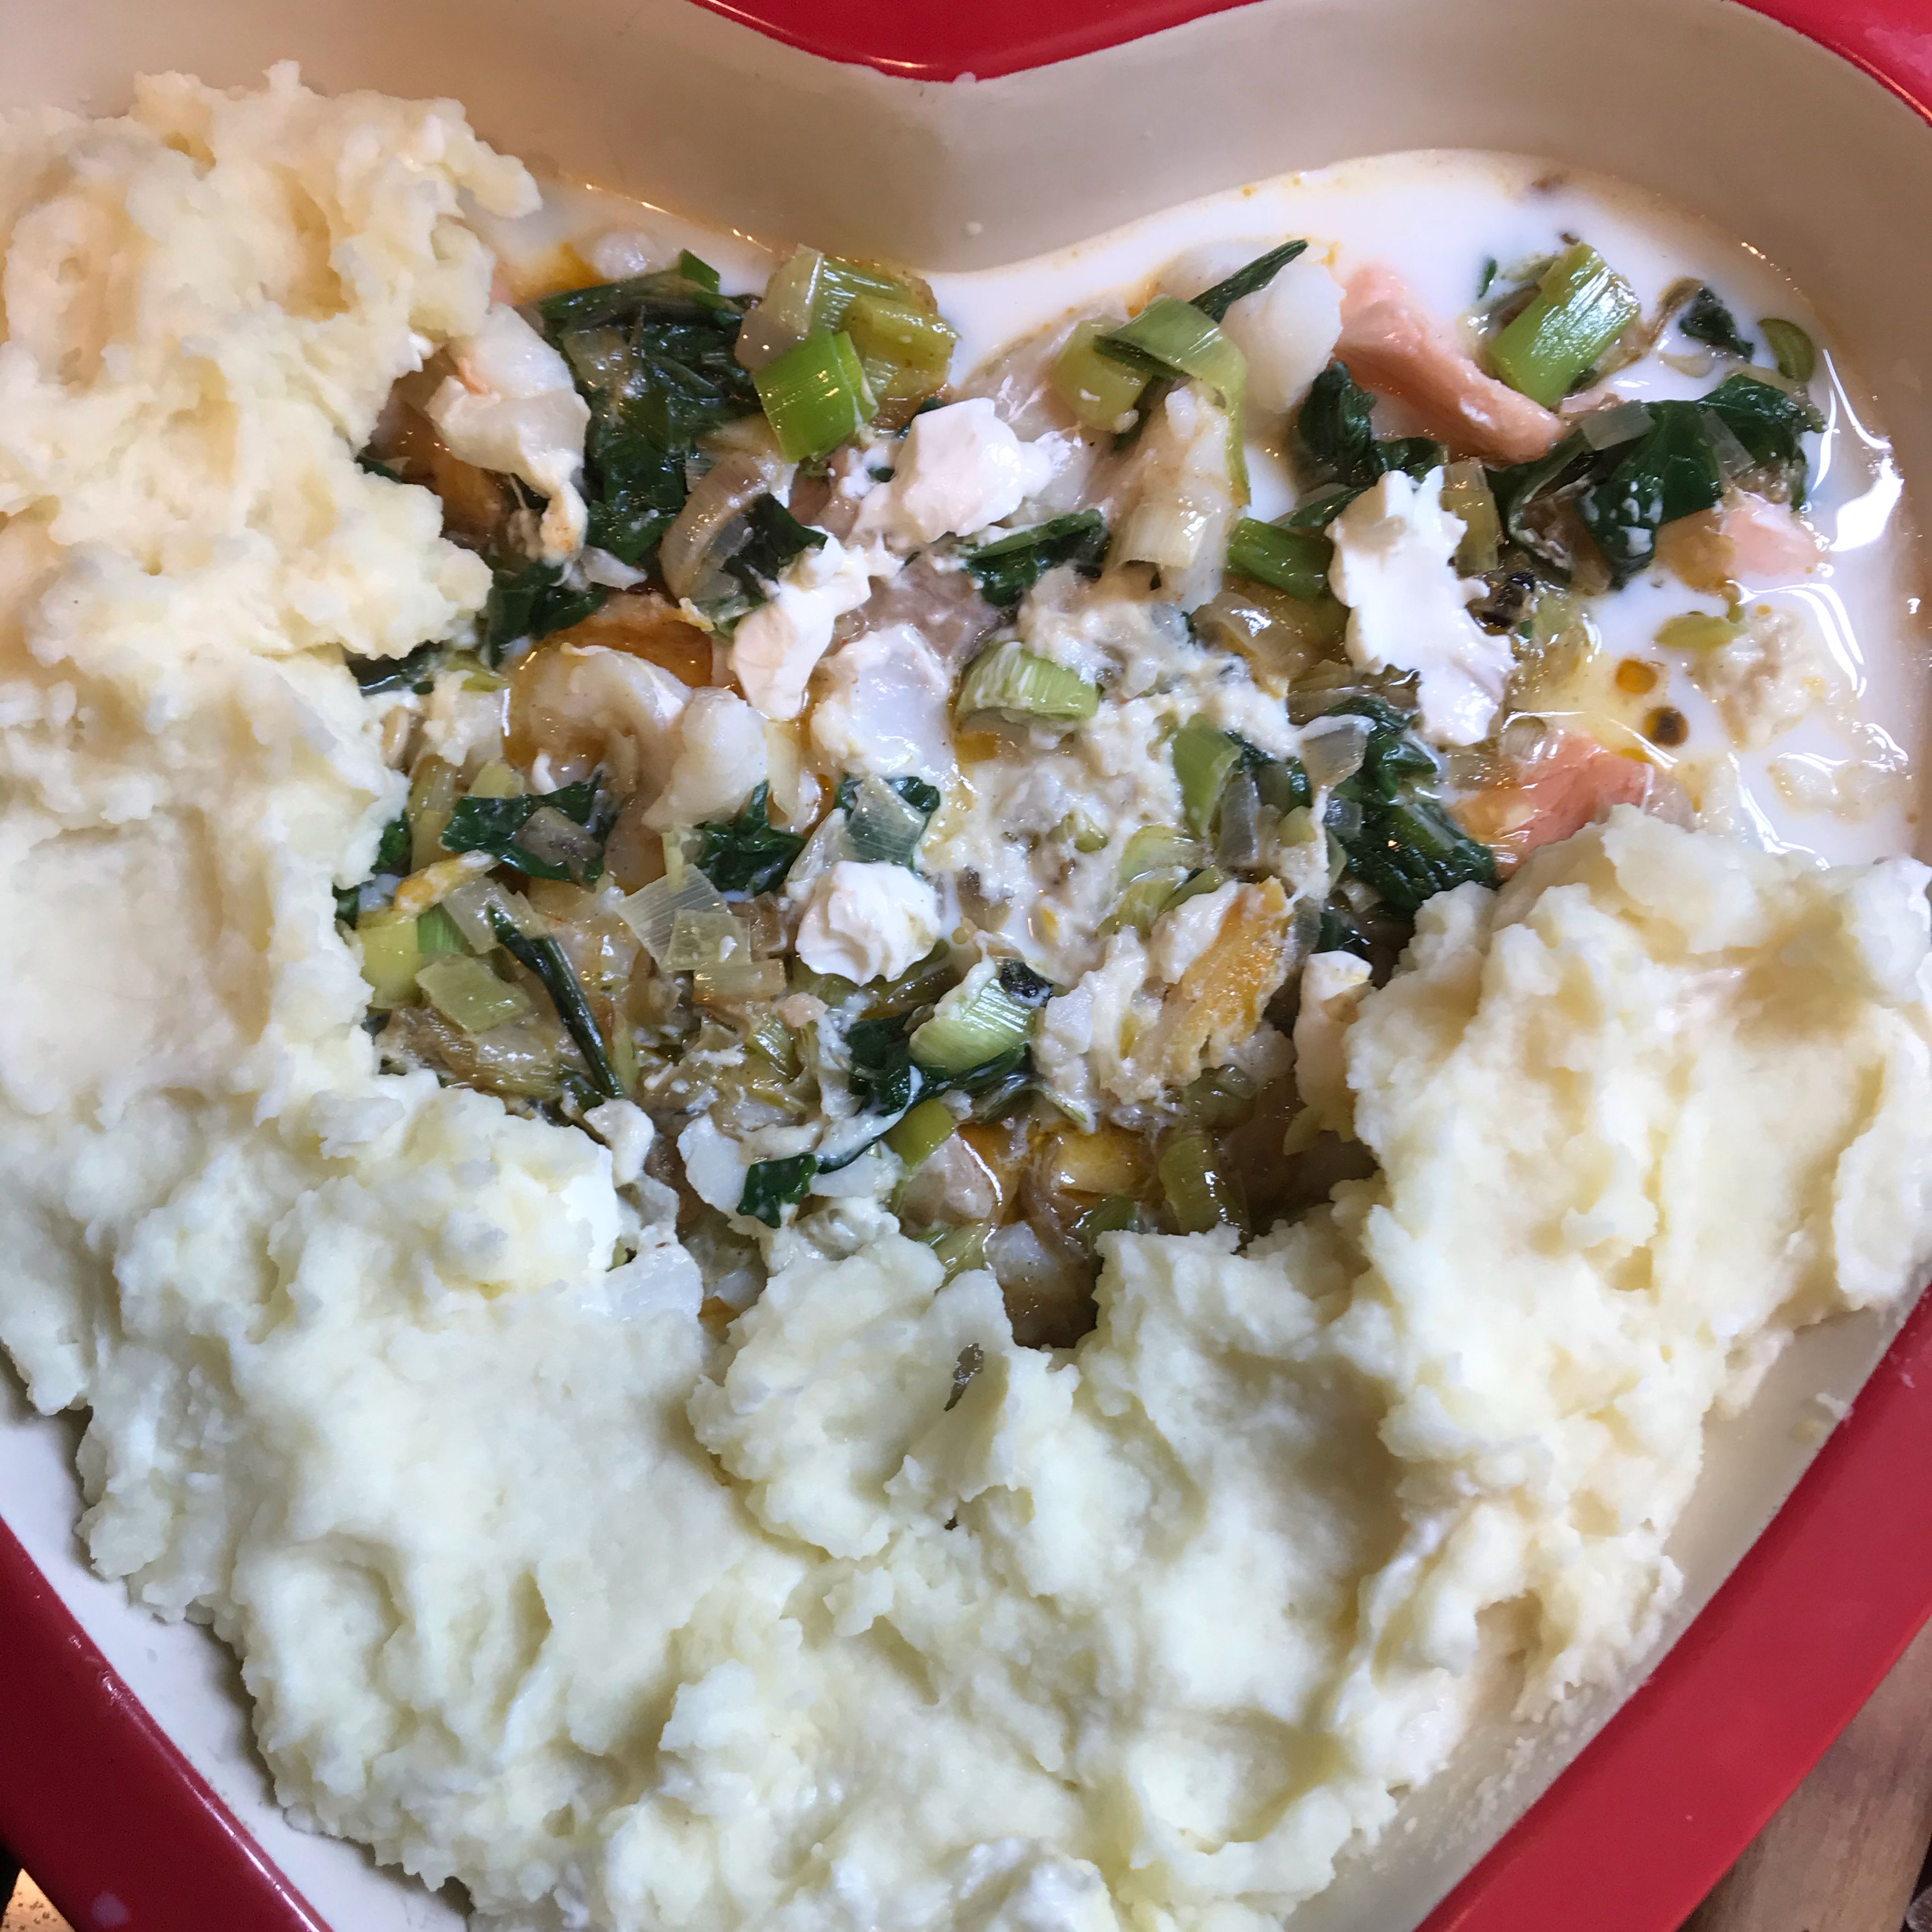 Cover with the mashed potatoes